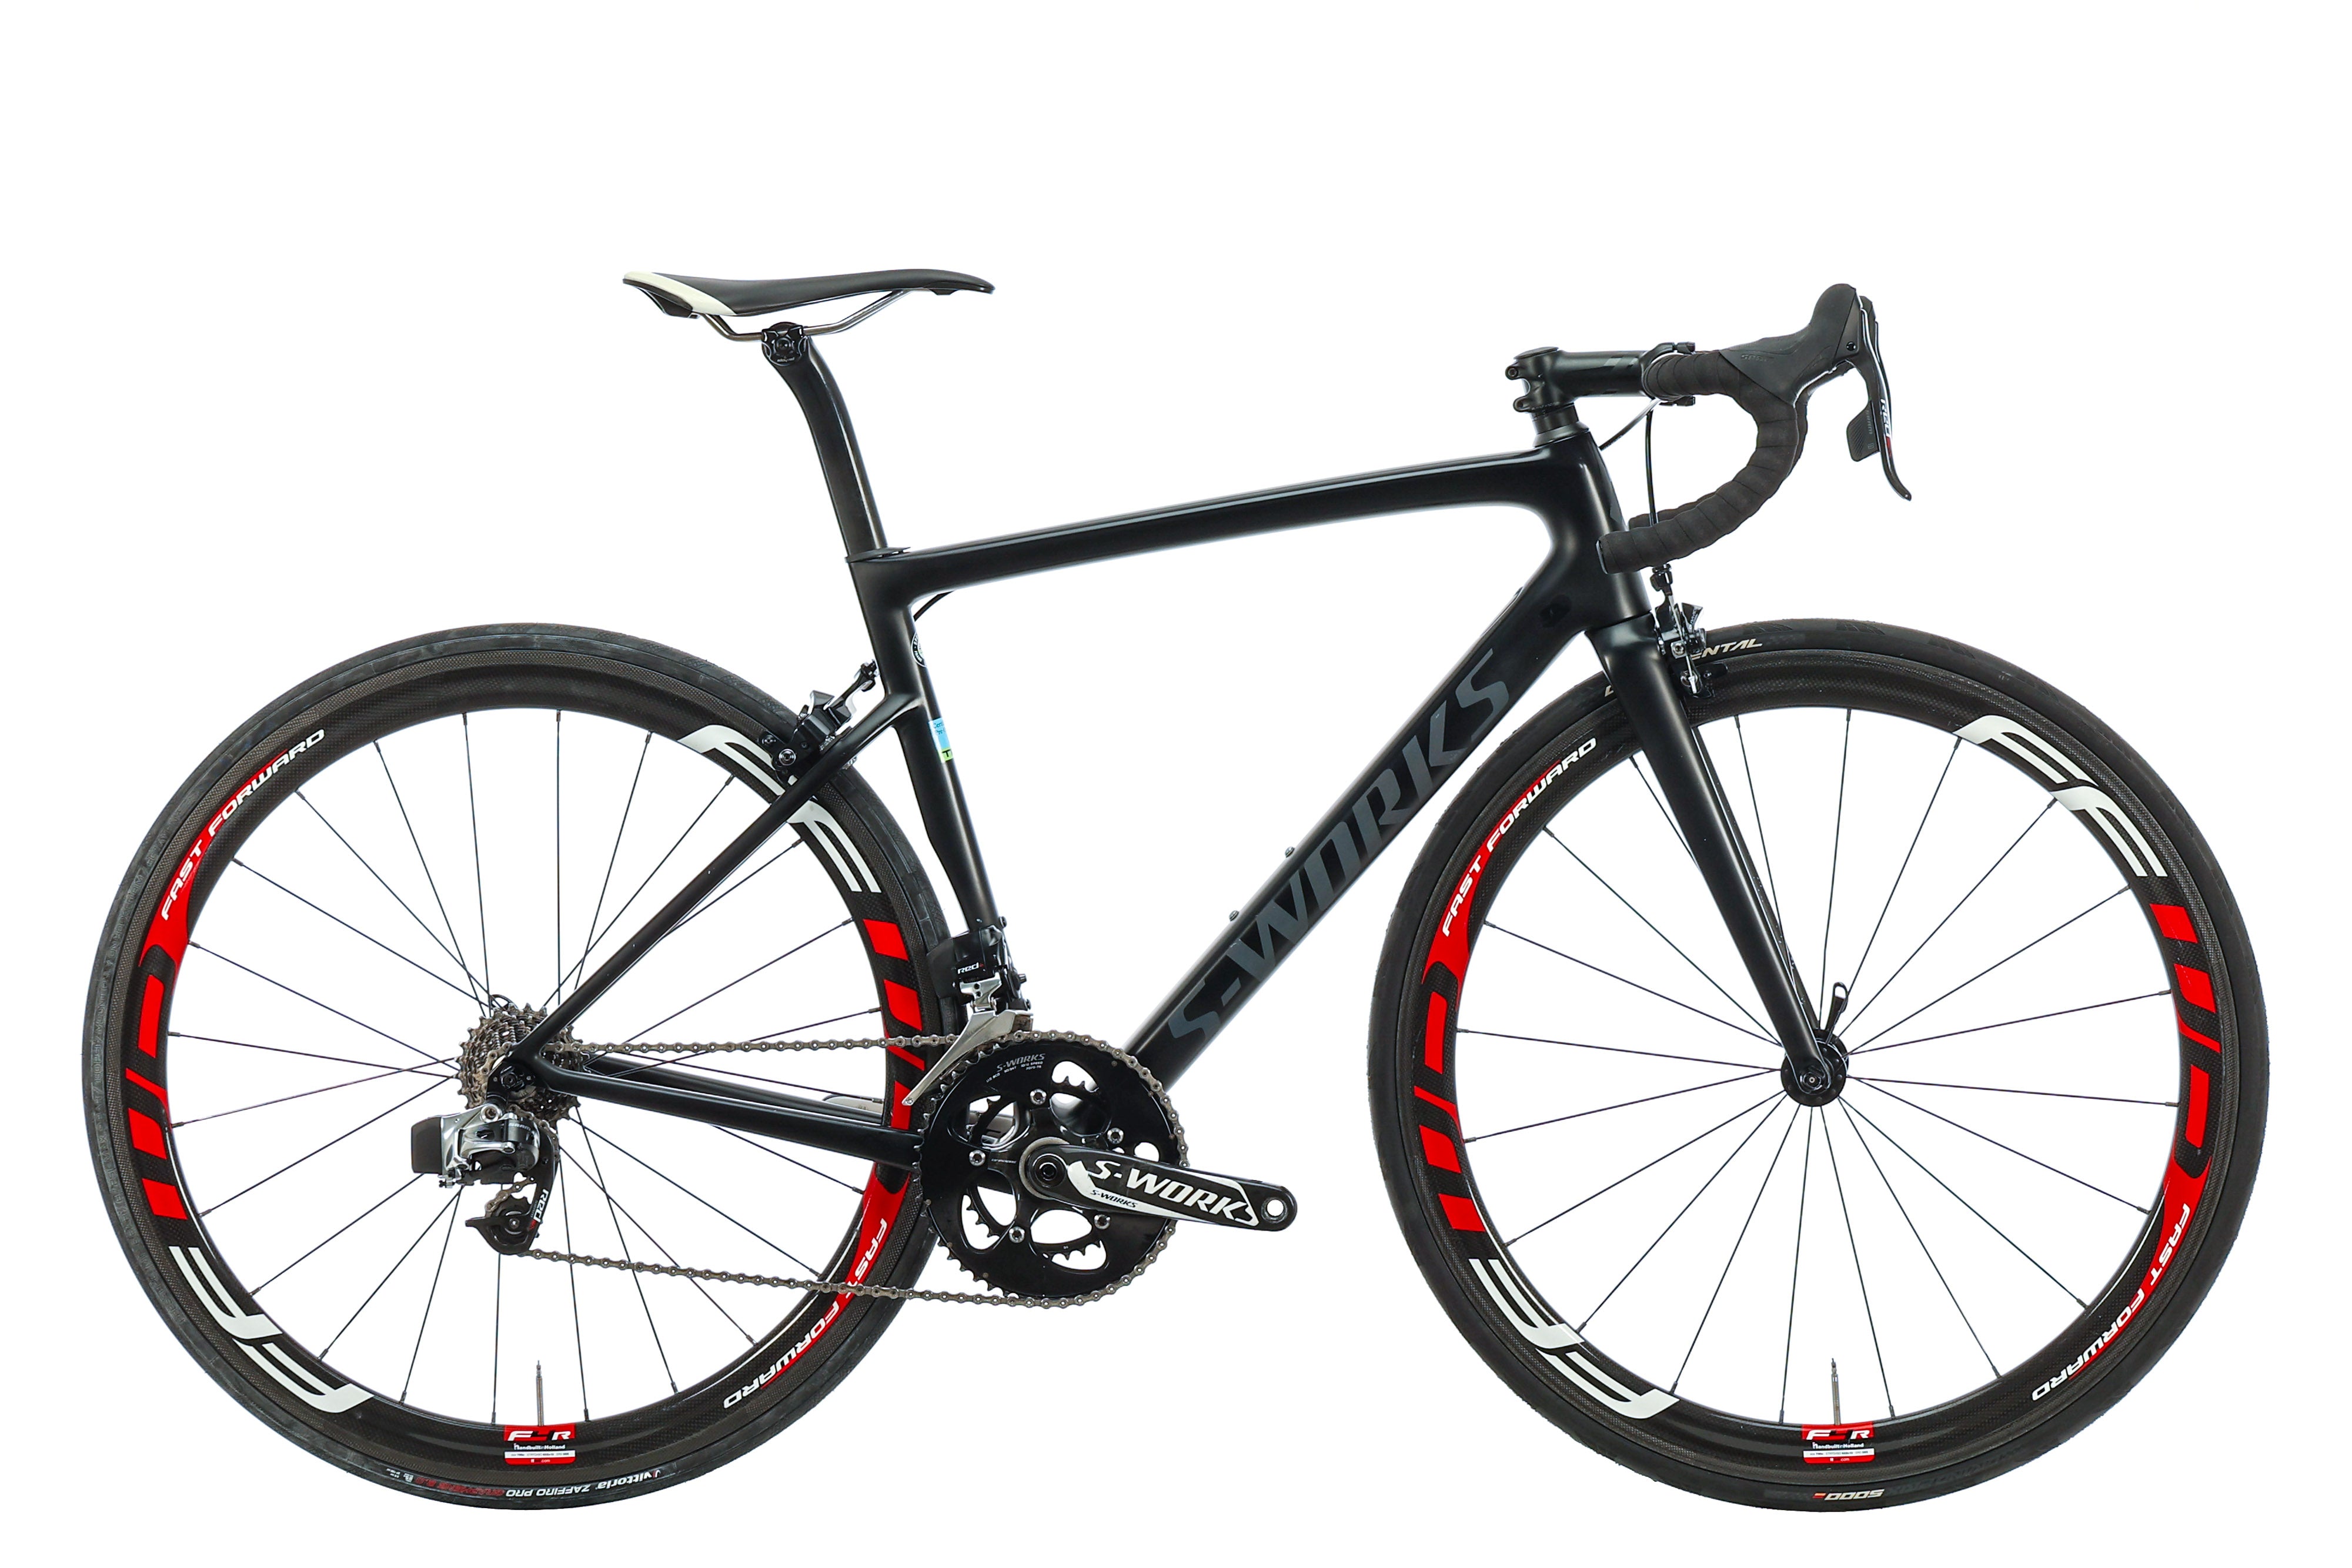 New and Used Road Bikes For Sale Aero, TT, Endurance and More TPC